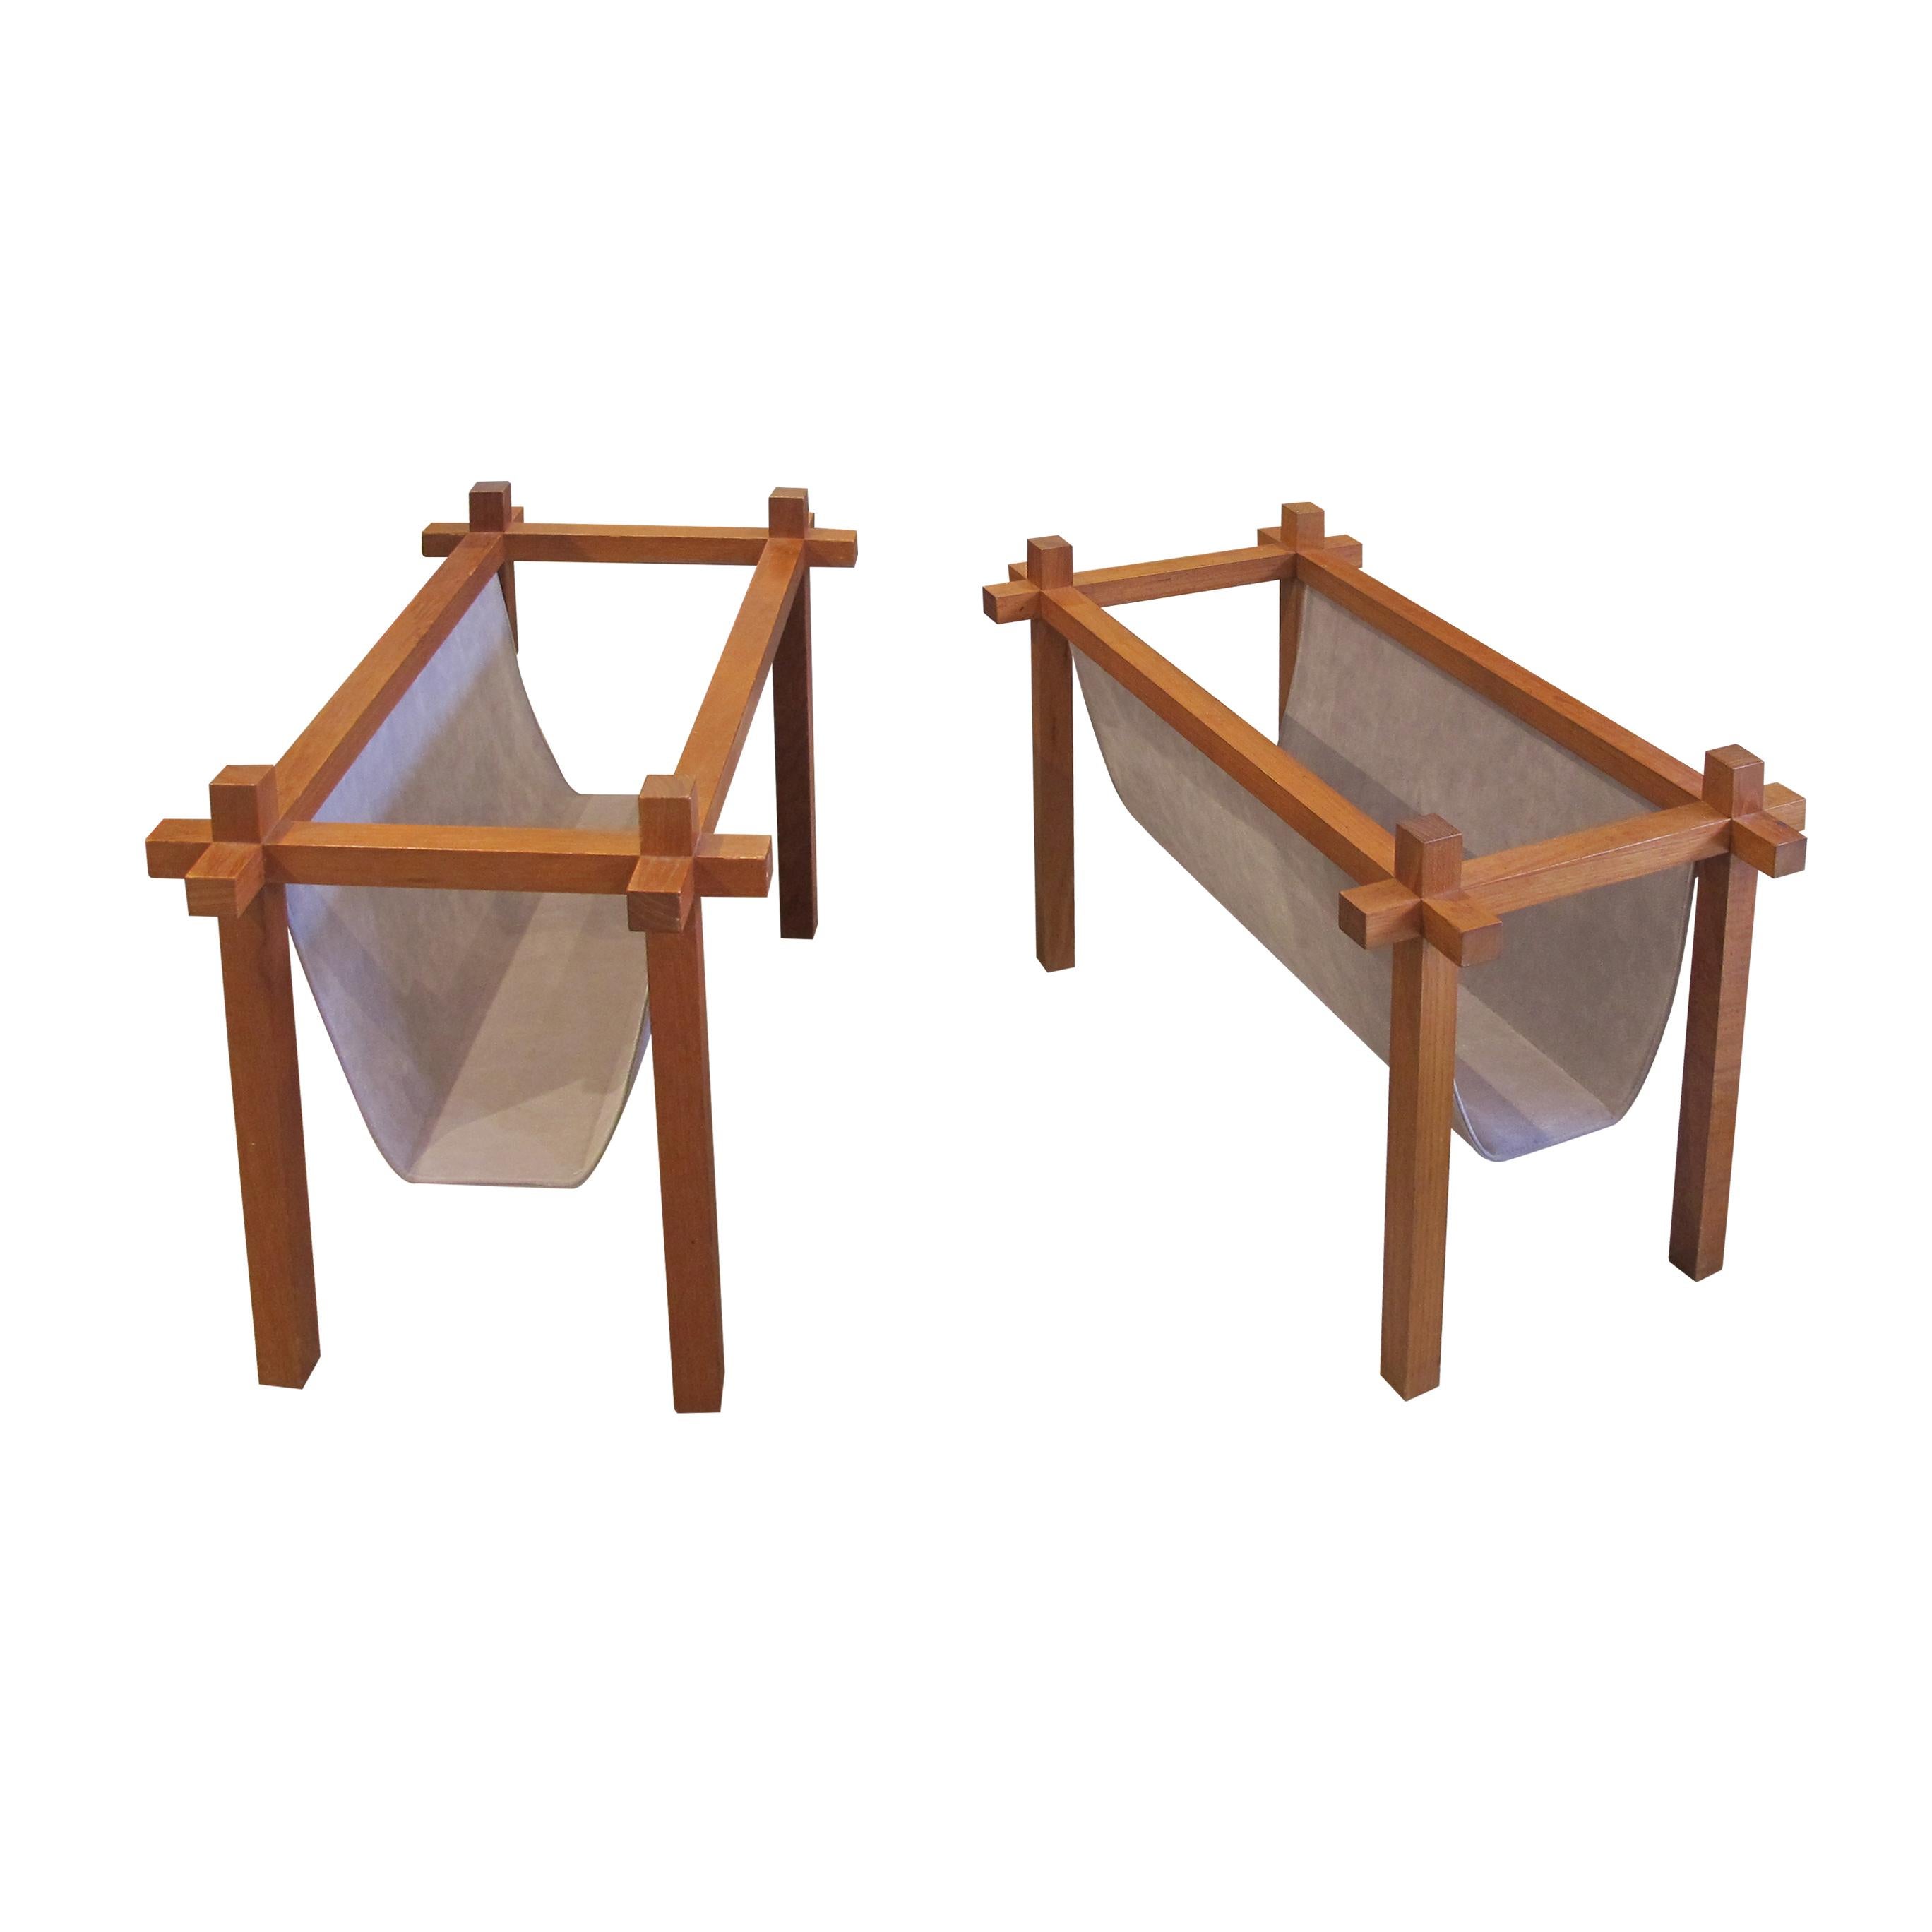 A pair of mid-century stylish teak and fabric magazine racks by Skjøde Skjern, Denmark, 1960s. The fabric was recently changed to a suede-like fabric in a mushroom colour, easy-care and very resistant.

Size: H44 cm x W61 cm x D33 cm
